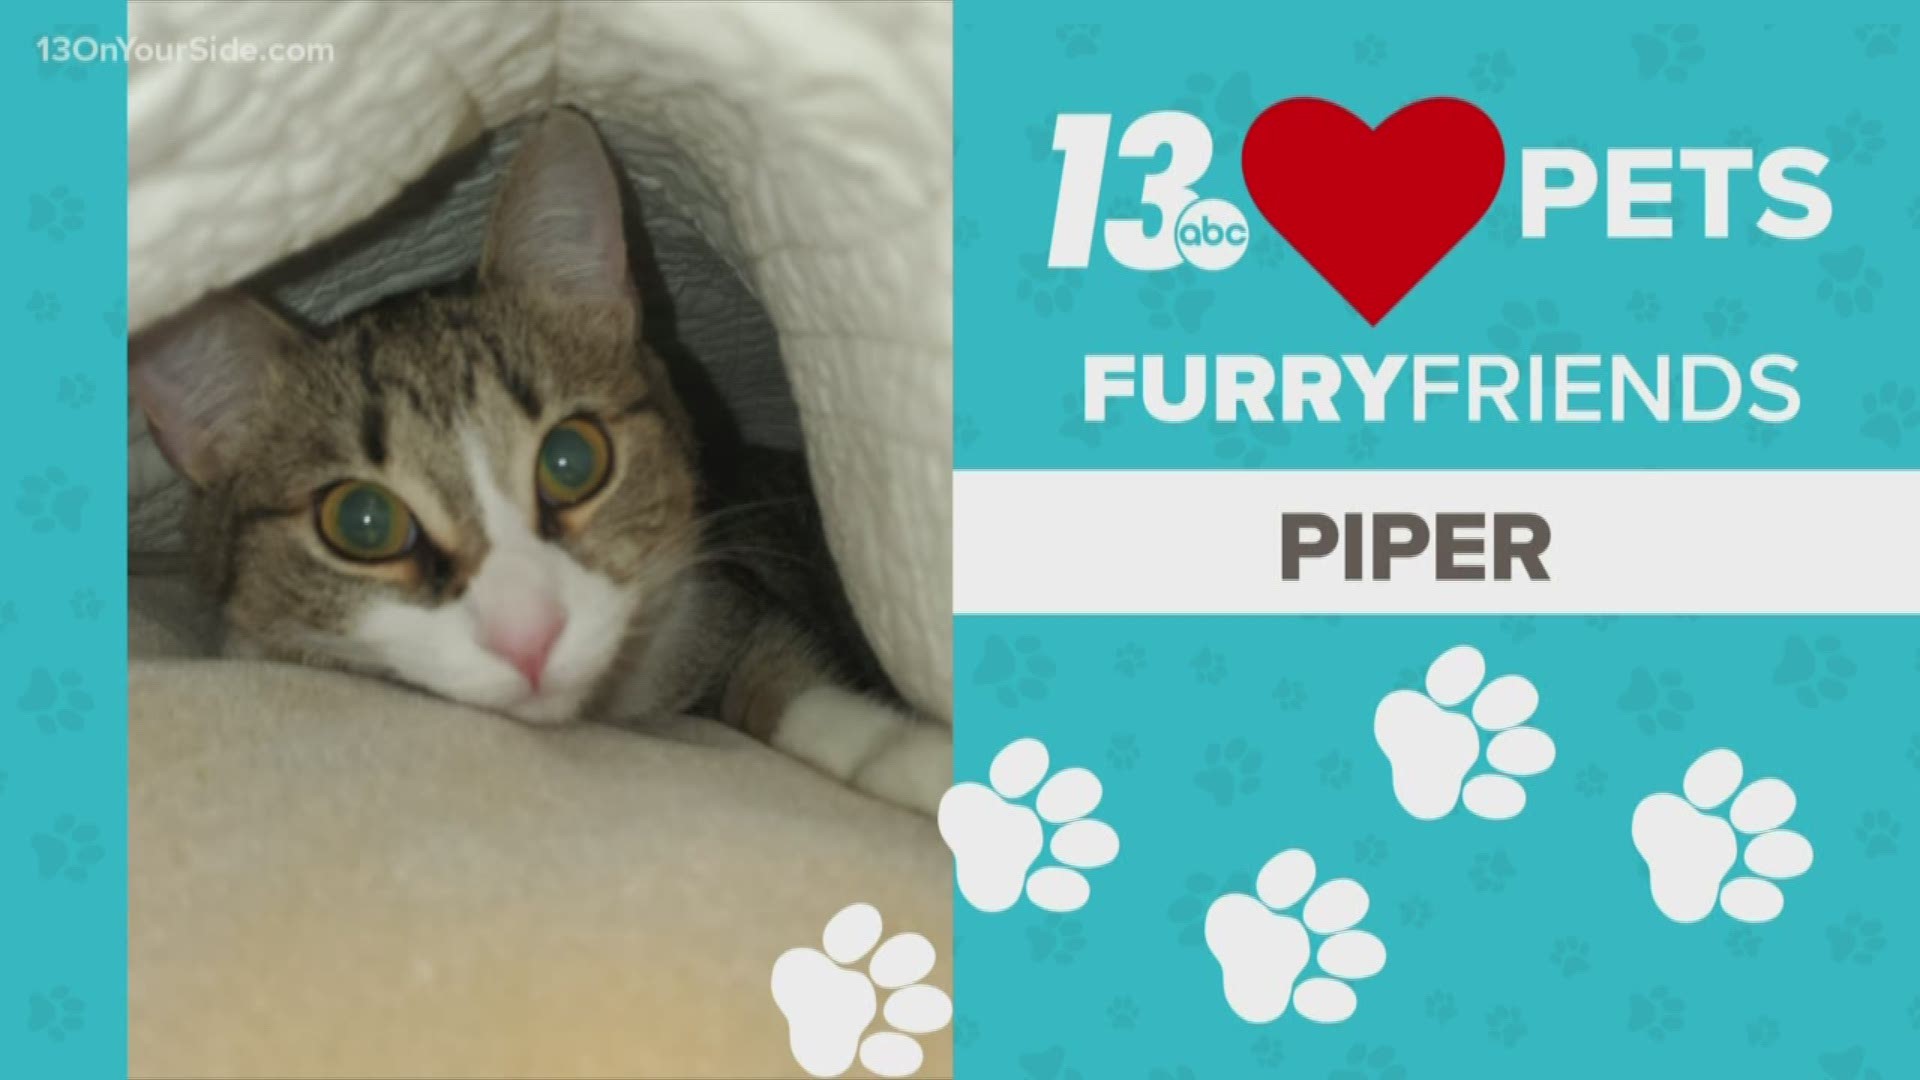 Meet today's Furry Friend, Piper, who loves morning hide-and-seek! Who can resist that face?